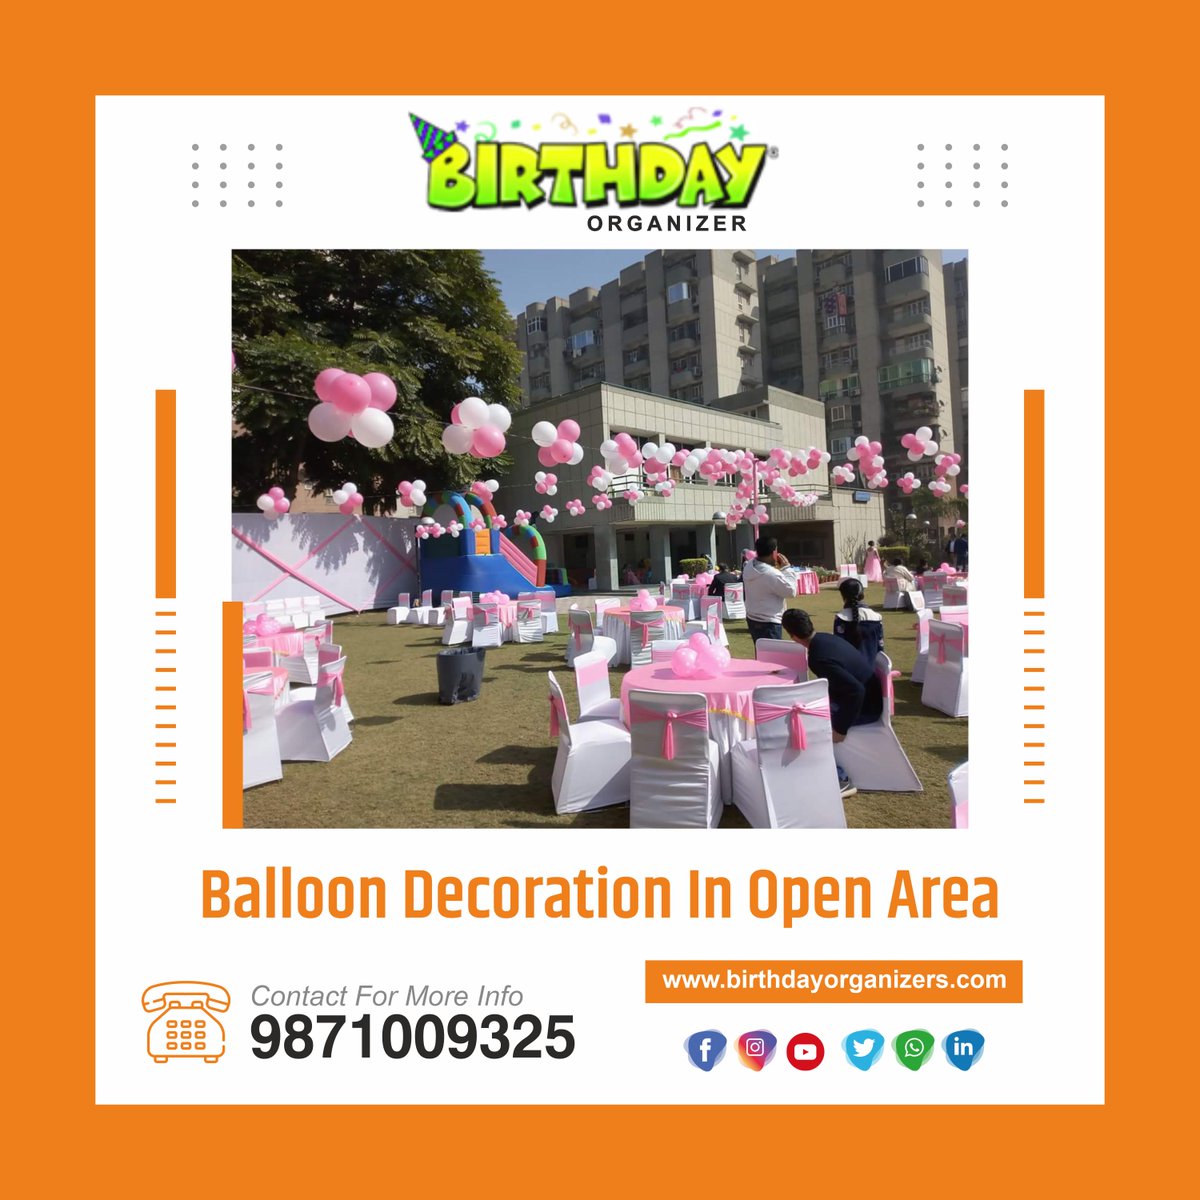 'Turning ideas into action' is one of our mantra.

For appointment call us ☎️7048997969, 9871009325 and follow us on our 🌐social media.

#balloondecoration #birthdaypartyplanner #happybirthday #birthdayparty #birthdayideas #birthdaydecoration #eventplanner #eventorganizer